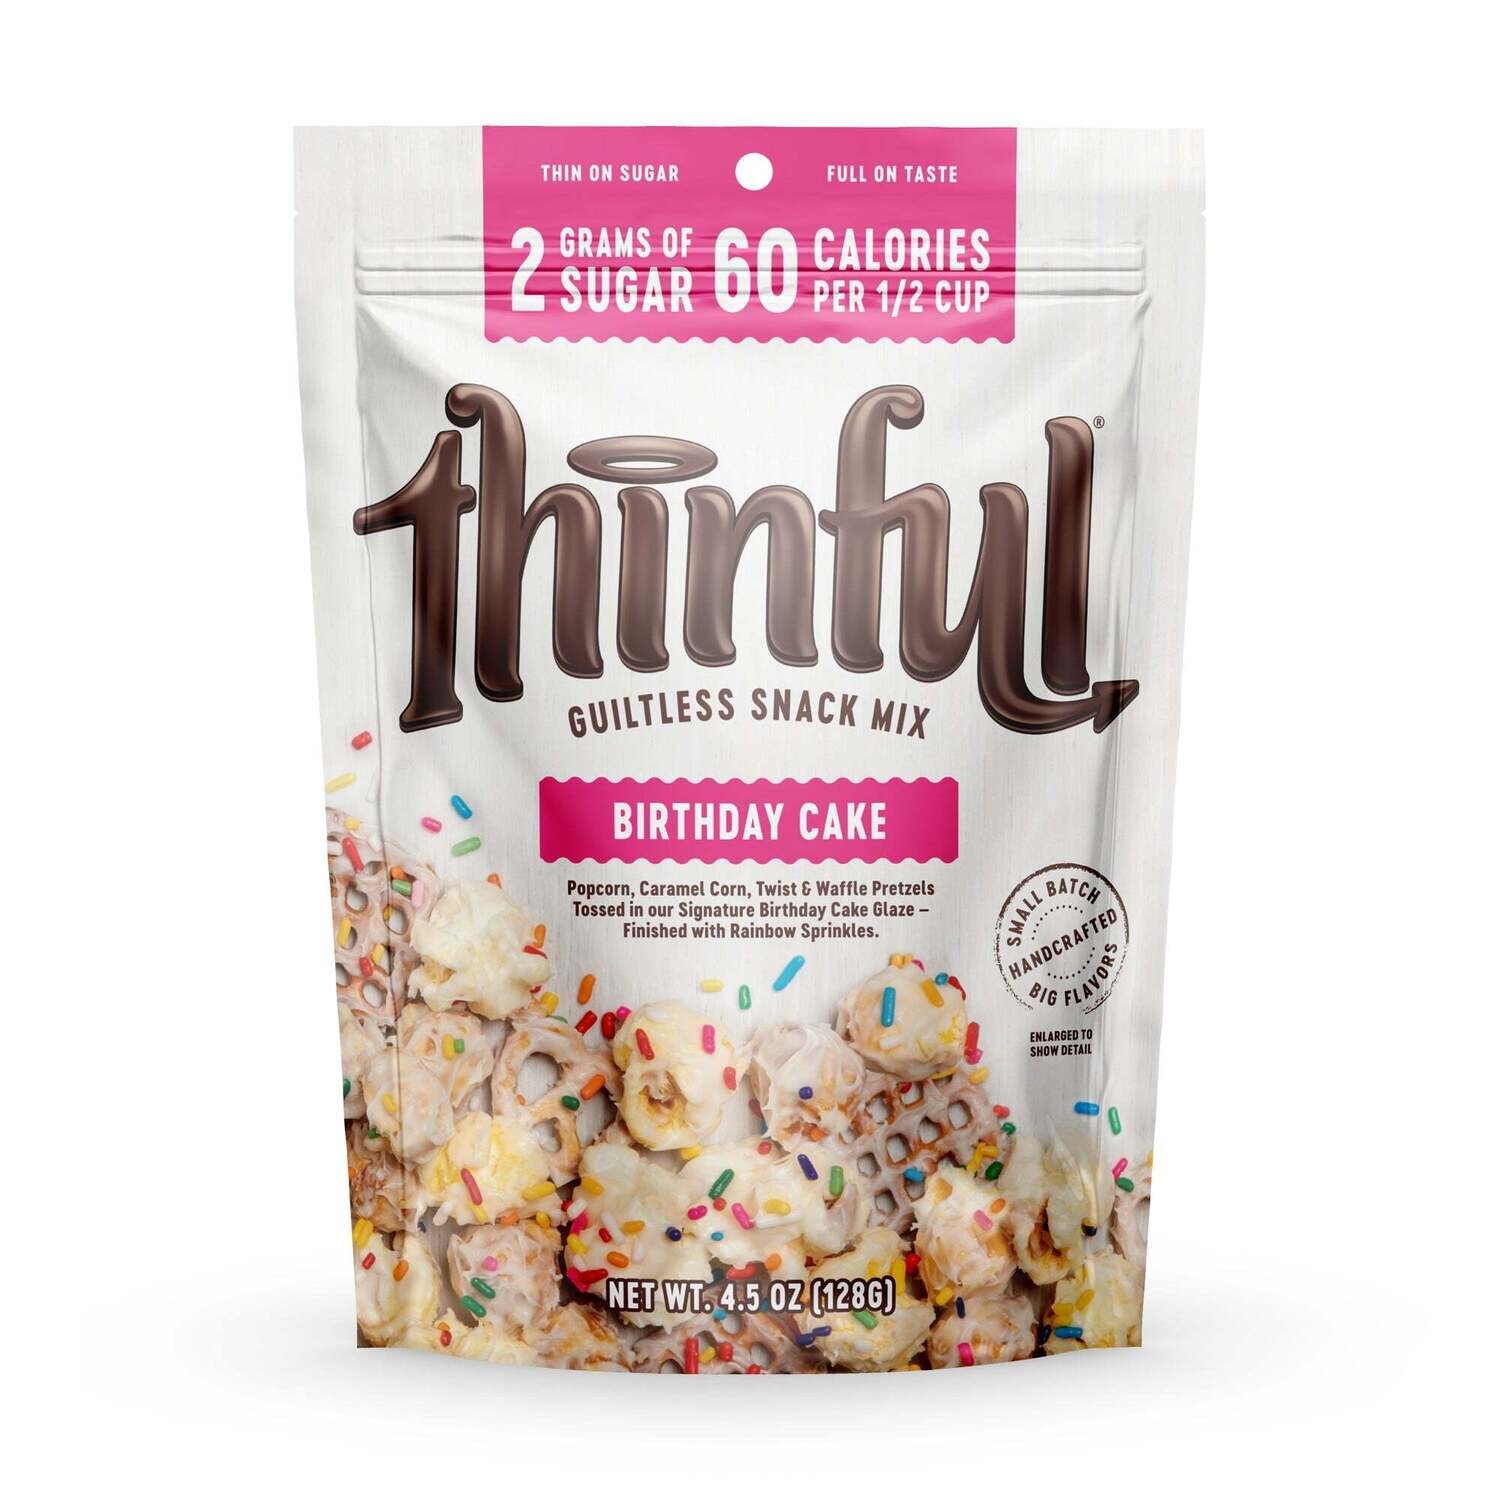 Thinful Guiltless Snack Mix Birthday Cake 2 g Sugar 60 Calories